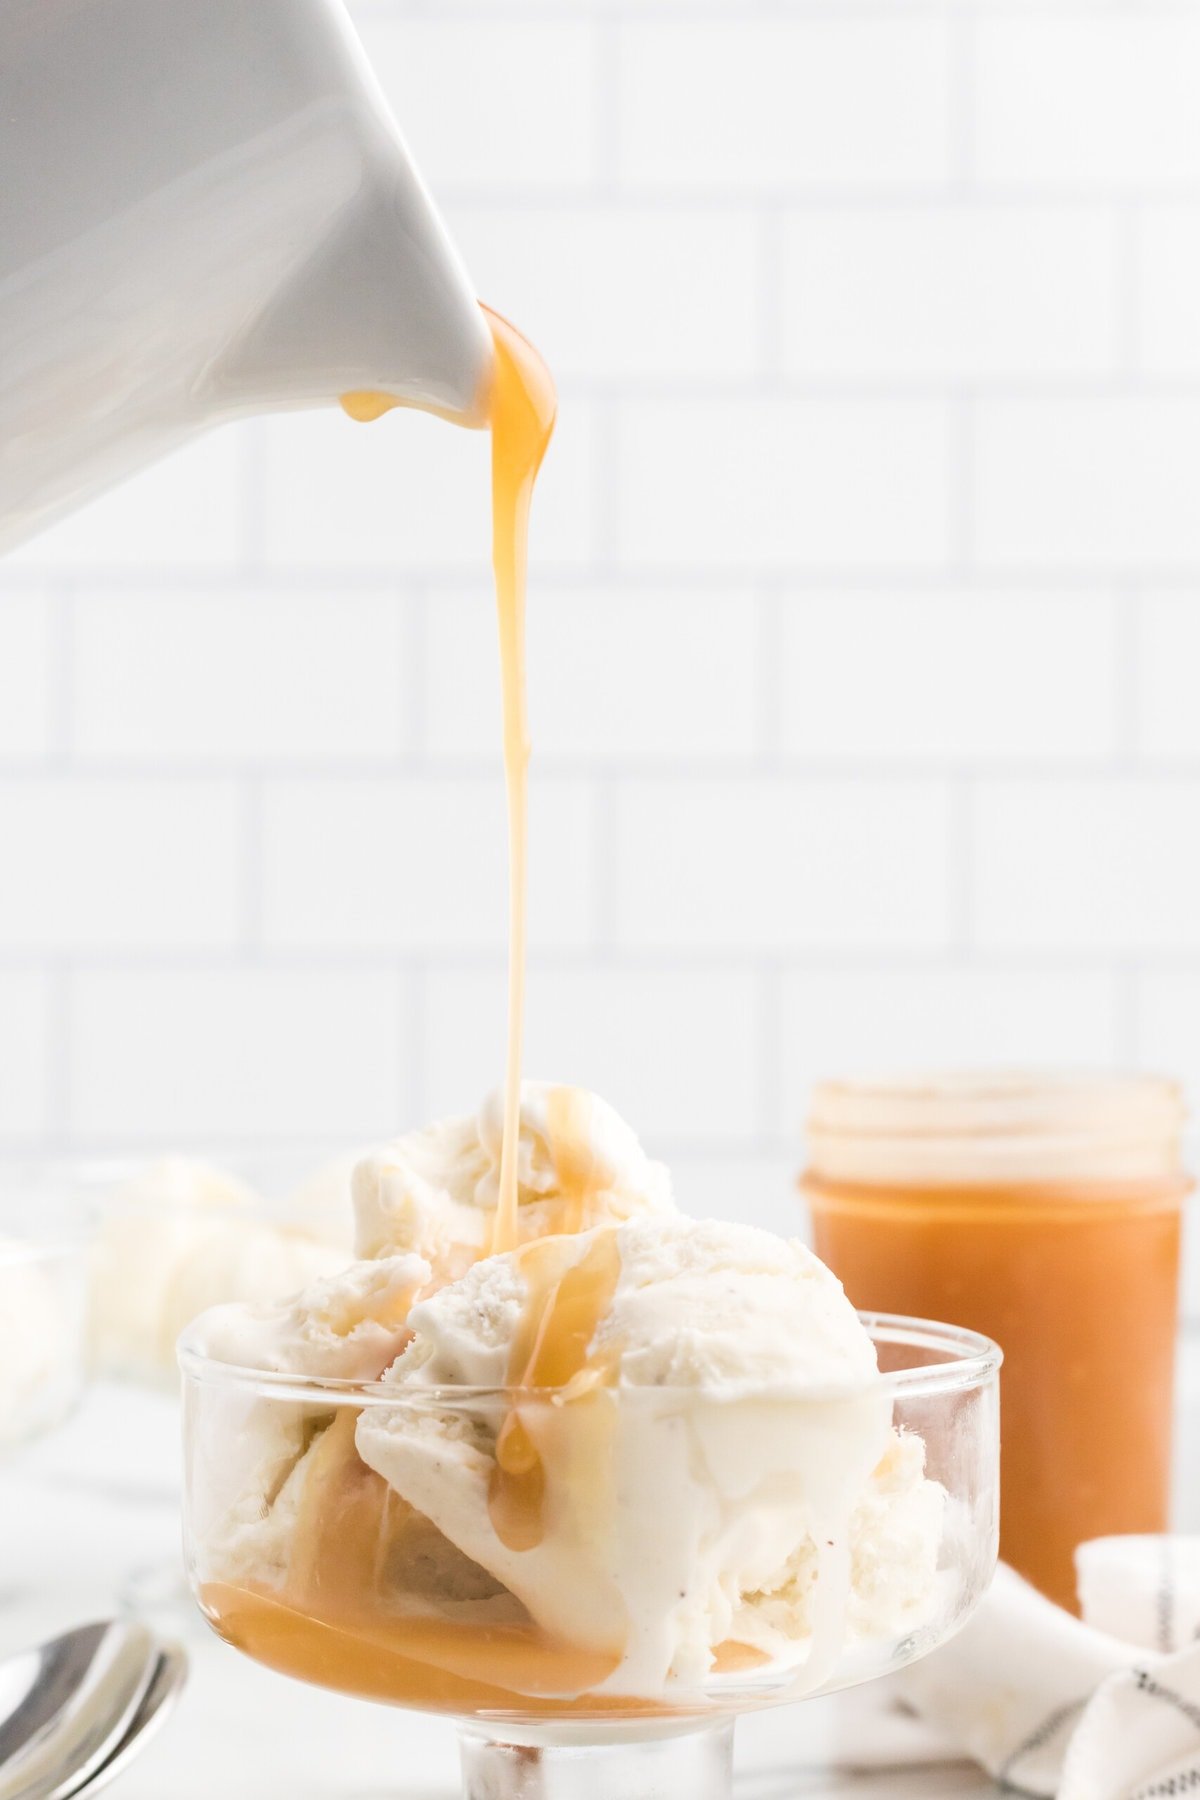 Caramel Sauce being poured on ice cream.